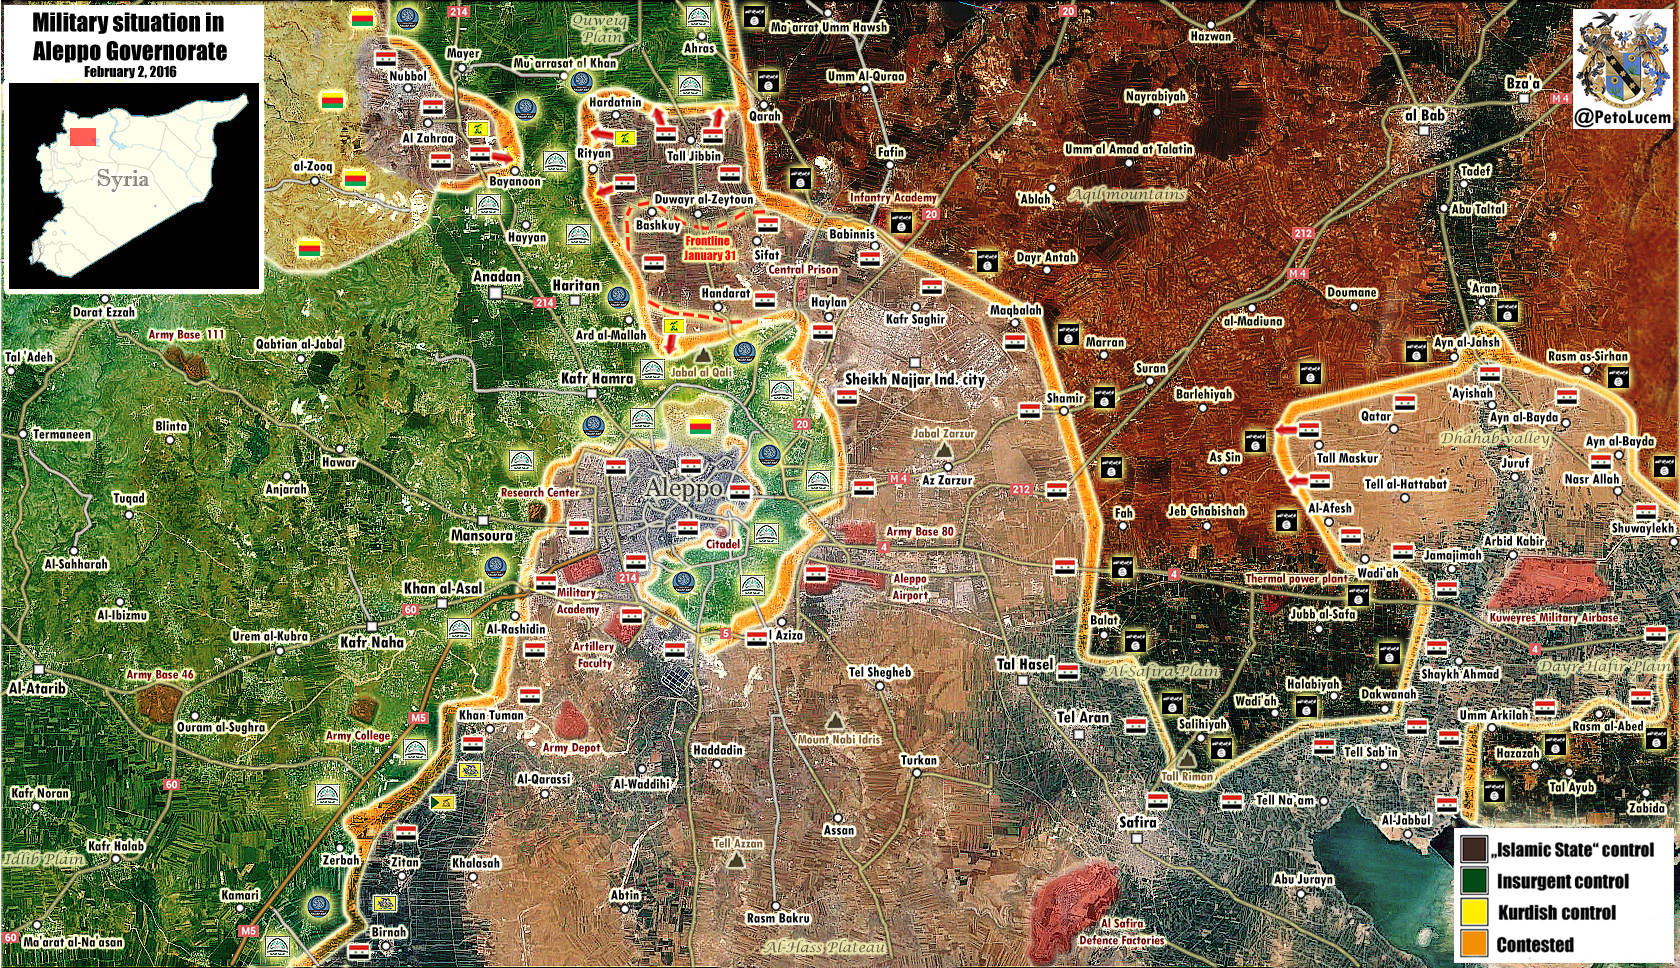 Map: The Battle for Aleppo - the "Mother of all battles"